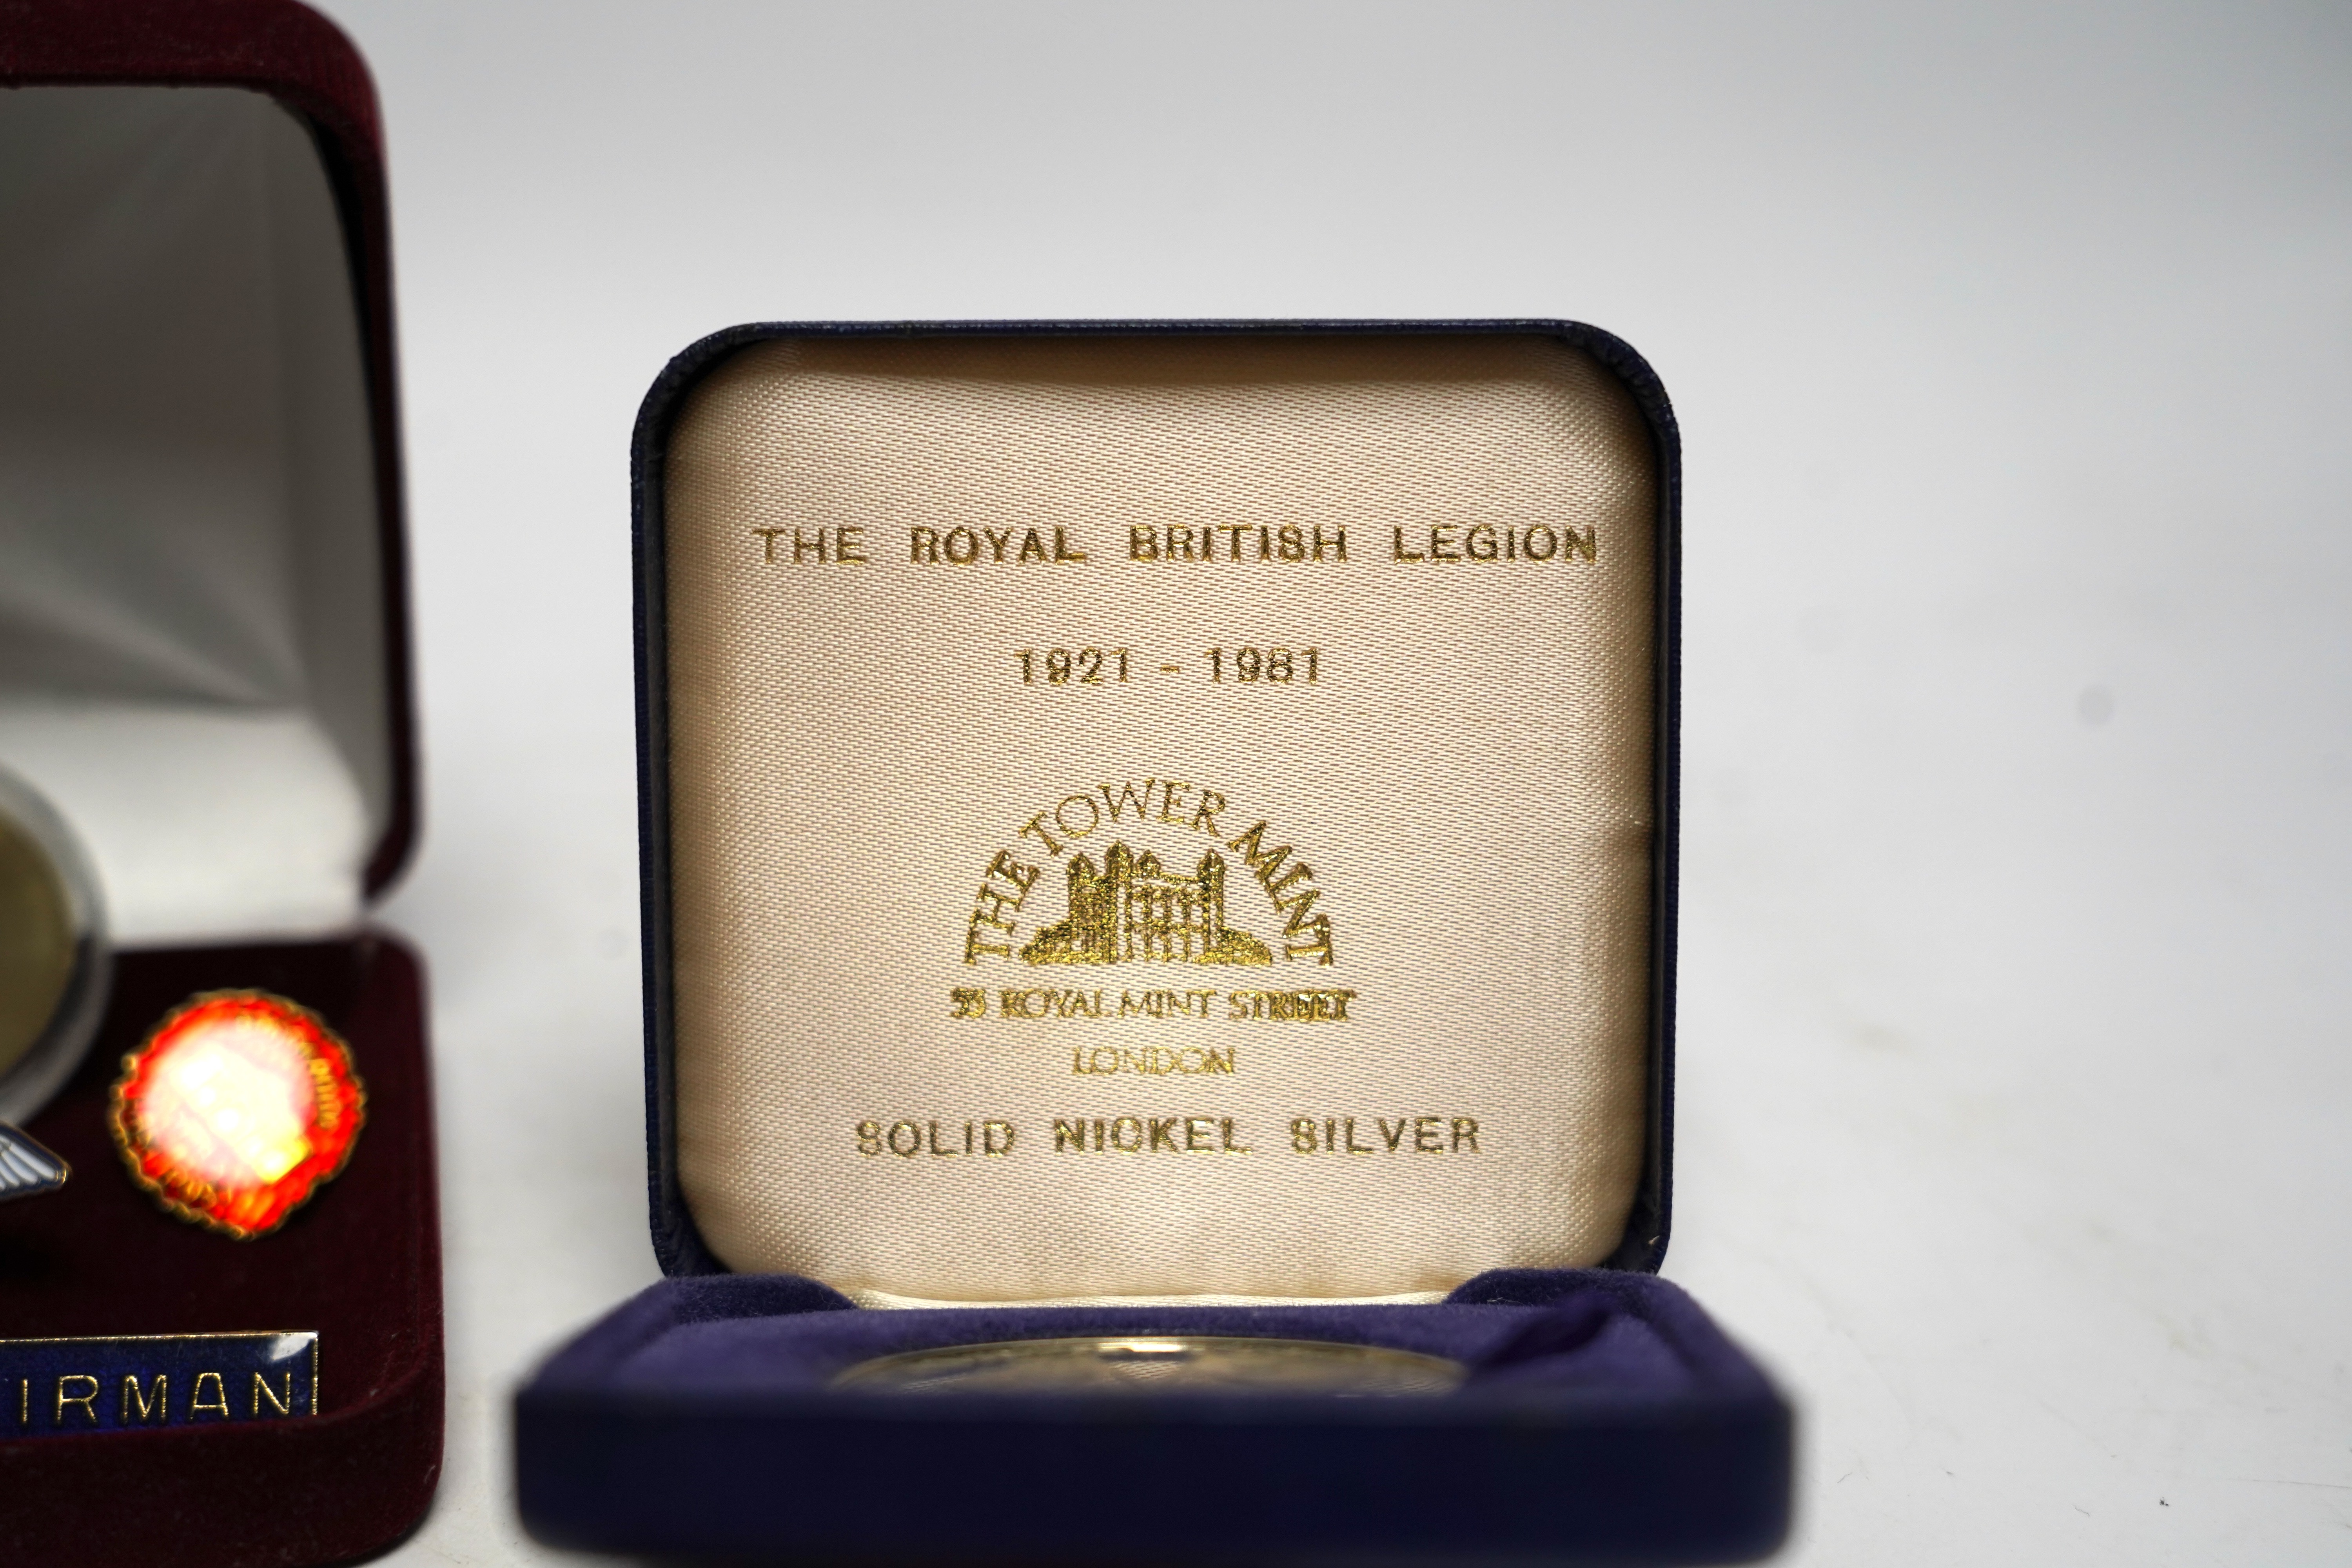 Royal British Legion interest, a Geoffrey Holden silver and enamel President's badge, silver medallions and sundries.